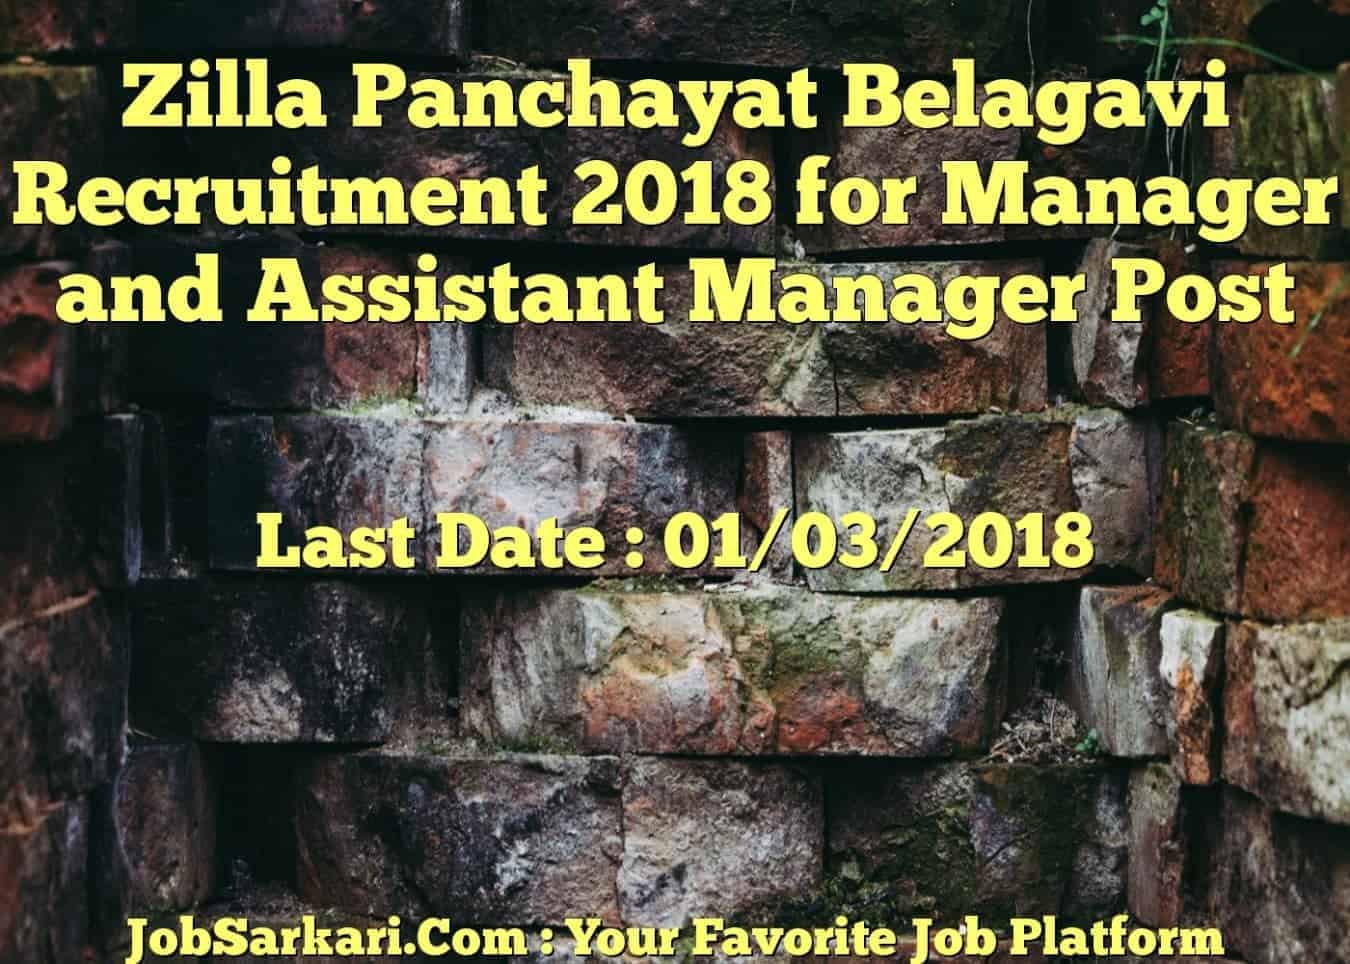 Zilla Panchayat Belagavi Recruitment 2018 for Manager and Assistant Manager Post